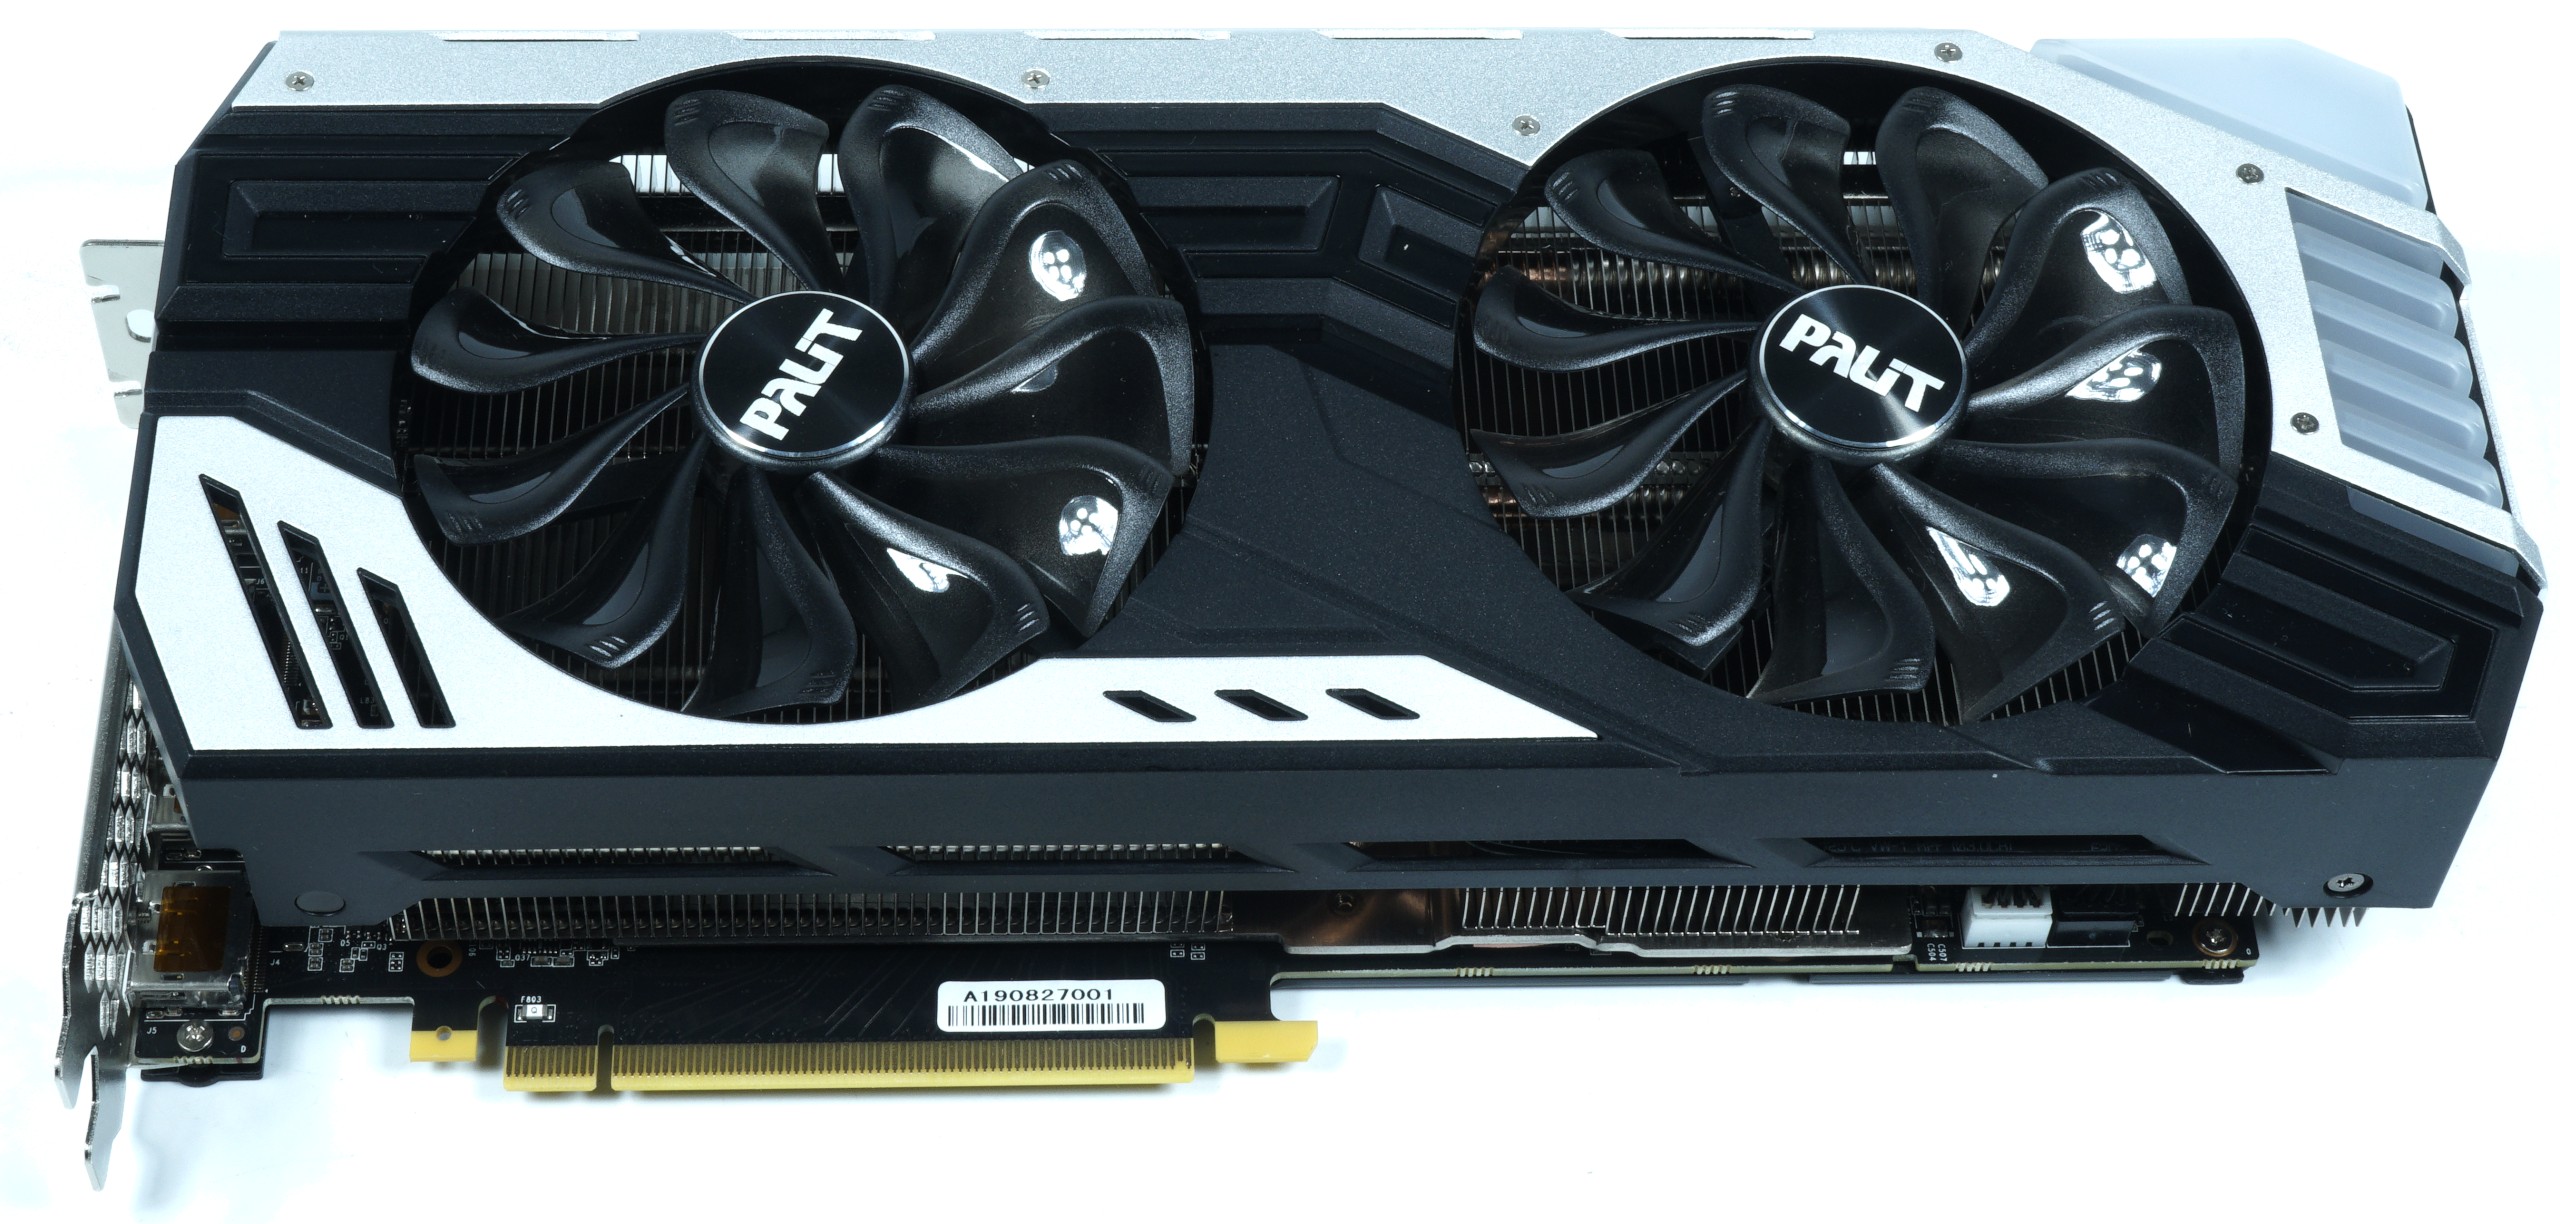 Palit RTX 2070 Super Jetstream review - Almost silent and 